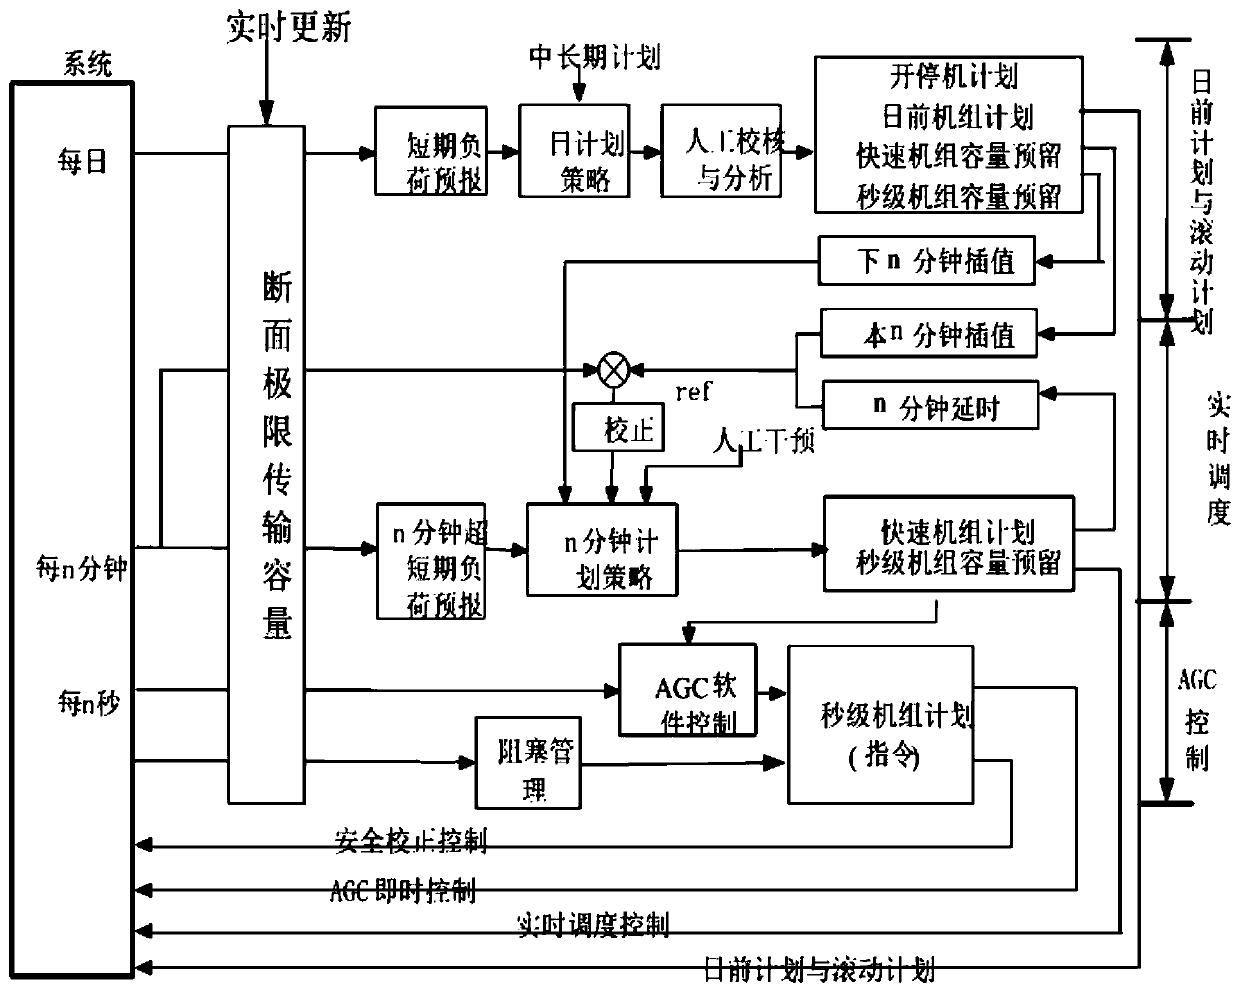 Active power dispatching model and dispatching system with minimum wind curtailment